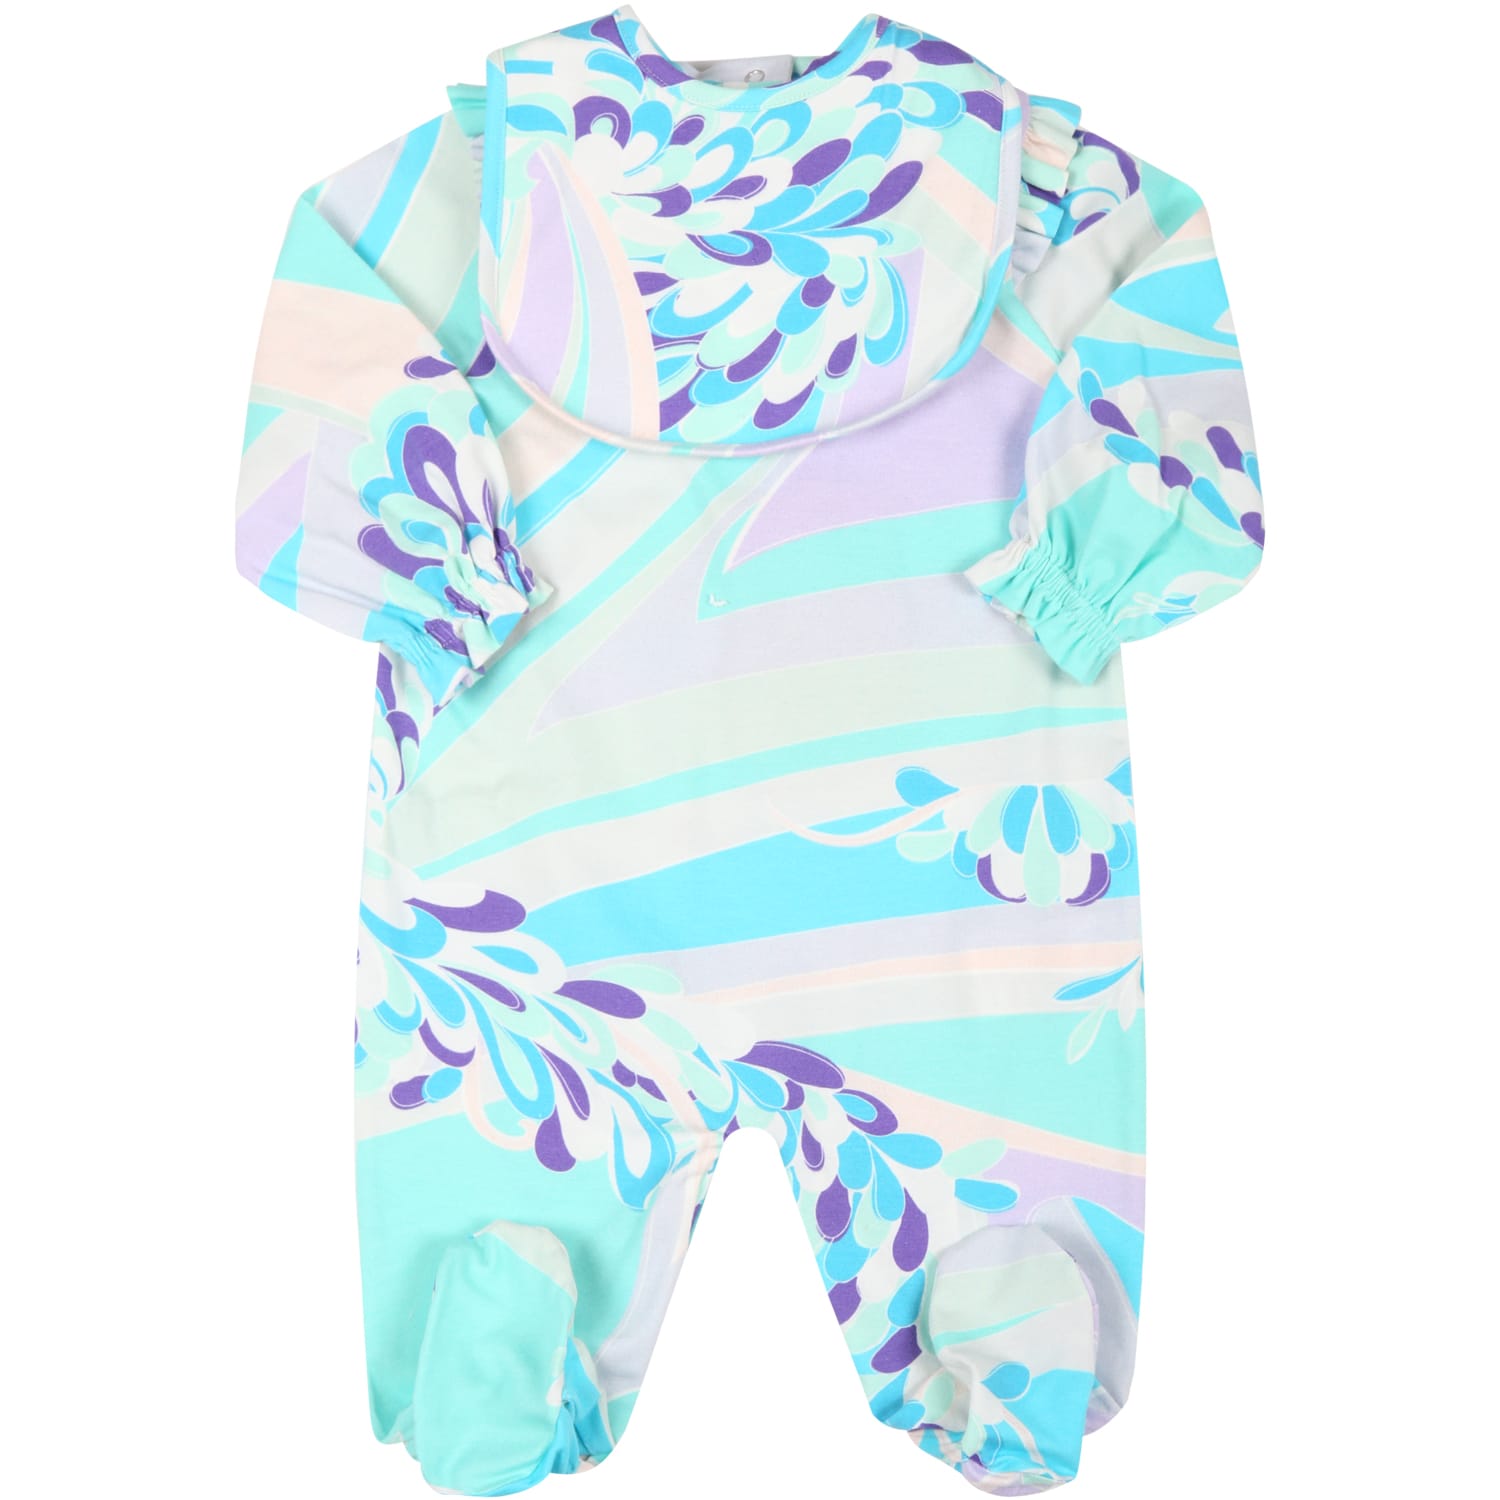 Emilio Pucci Light Blue Set For Baby Girl With Iconic Print In Multicolor